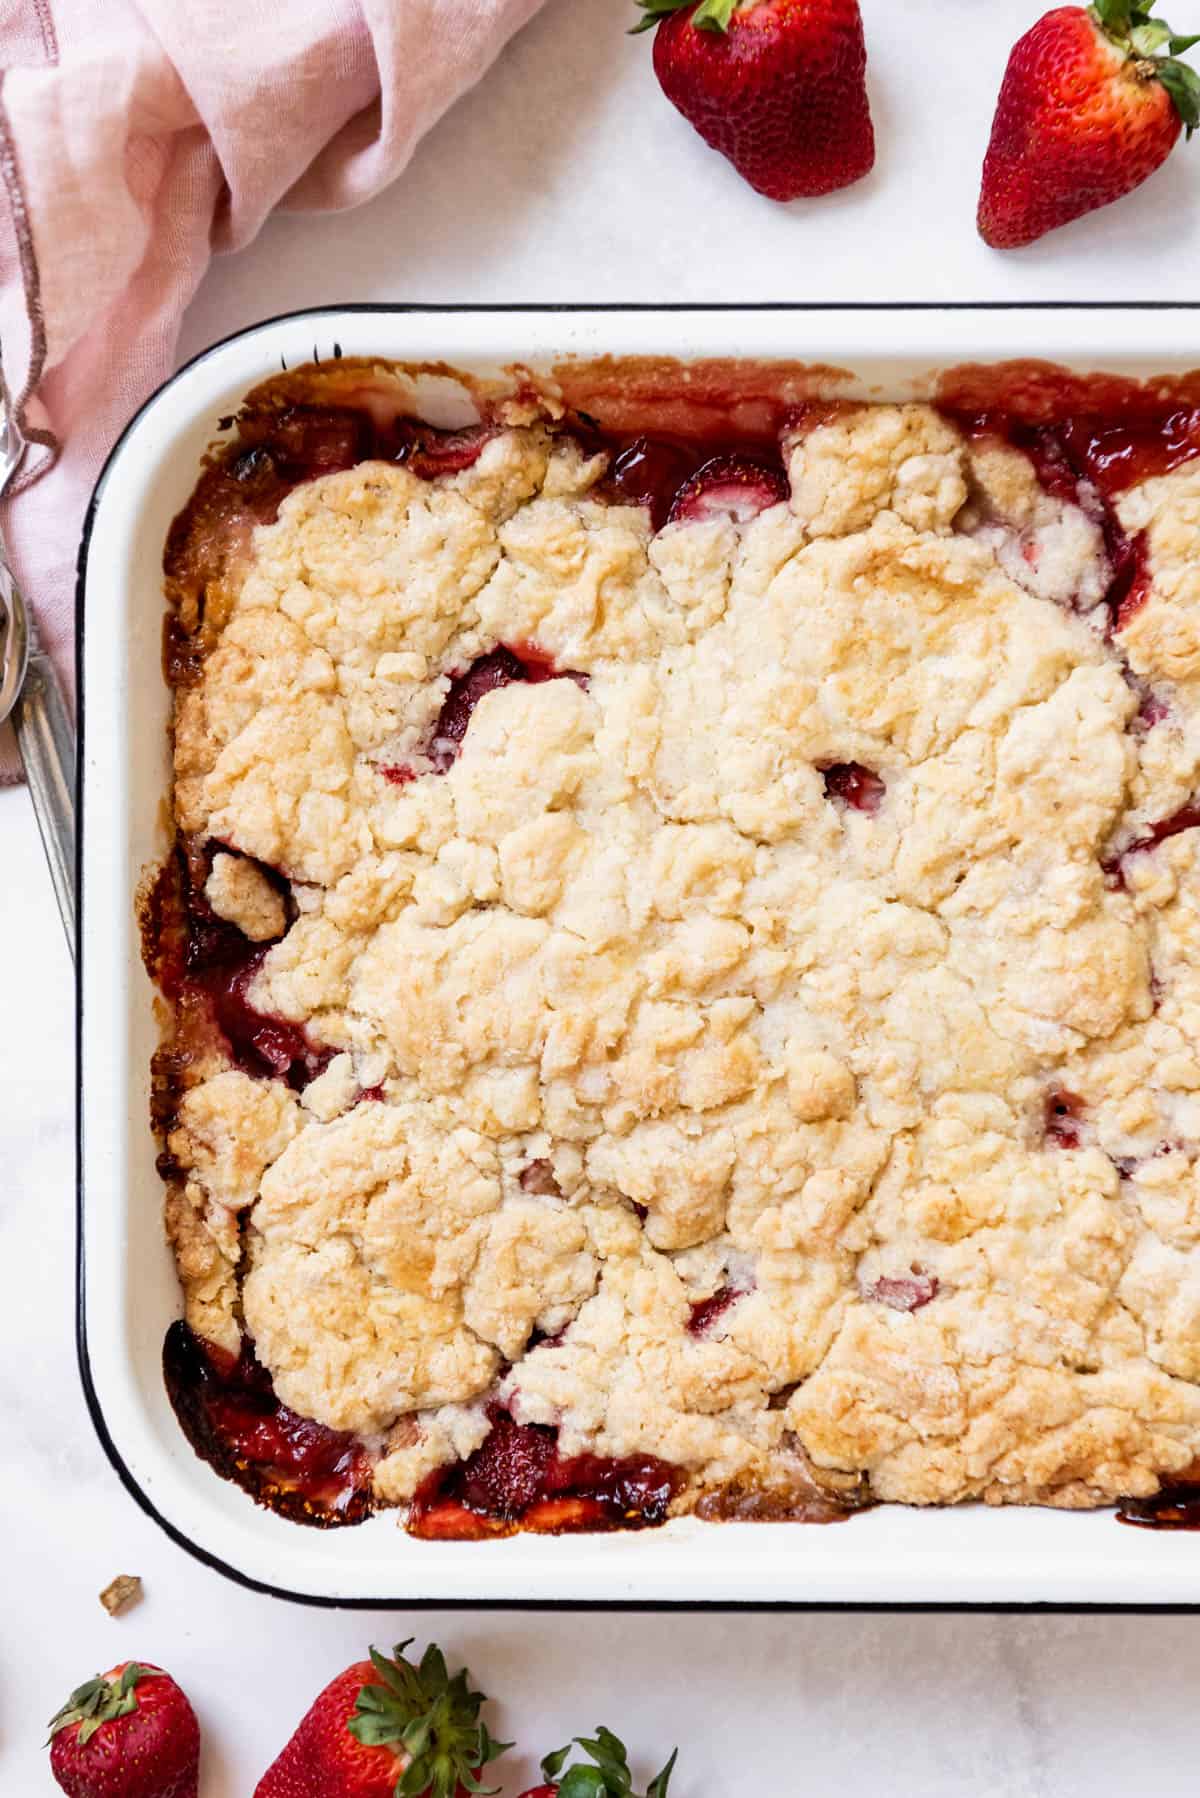 A homemade strawberry rhubarb cobbler with a few strawberries scattered nearby.